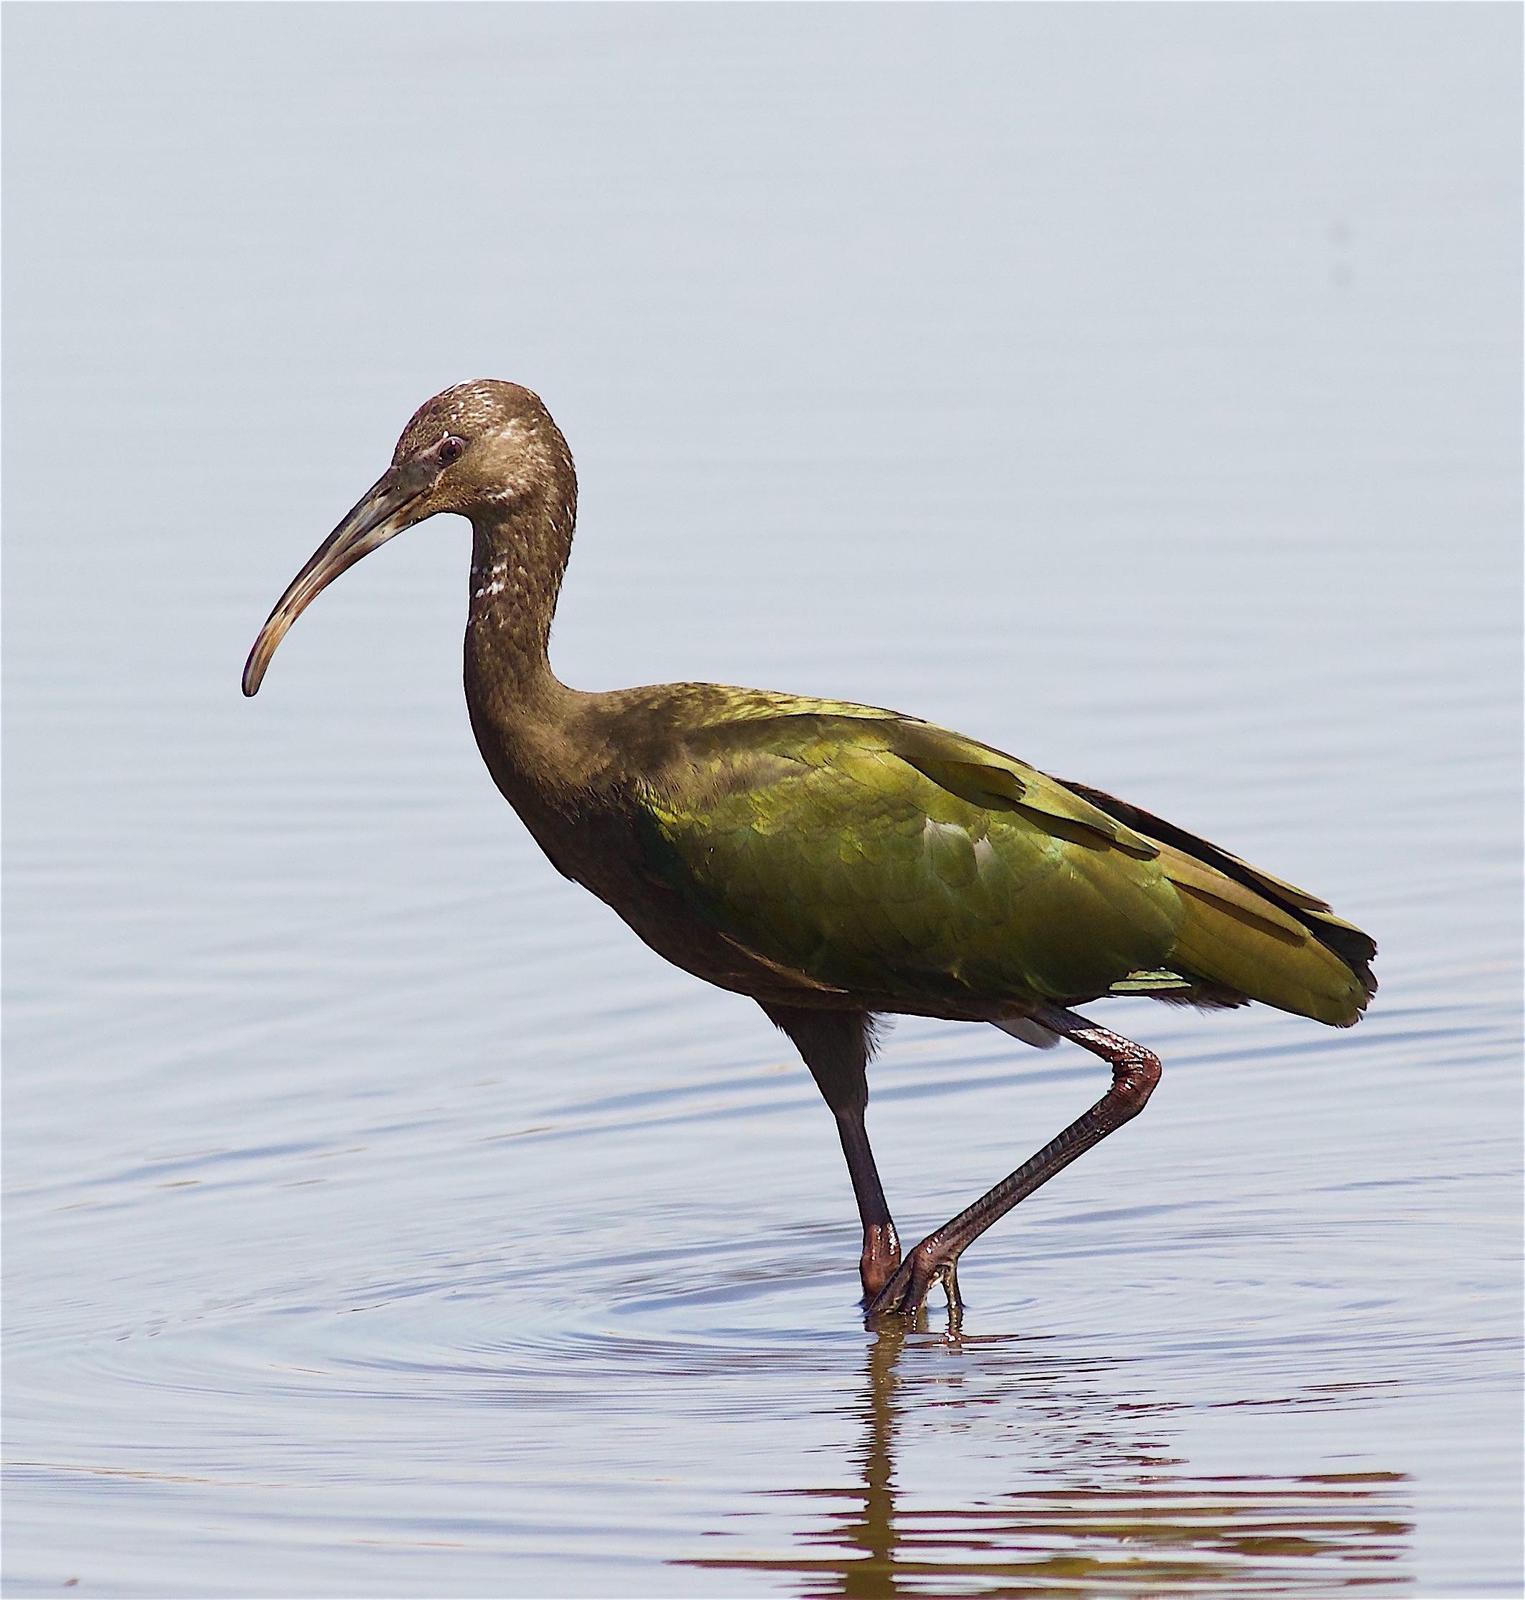 White-faced Ibis Photo by Kathryn Keith